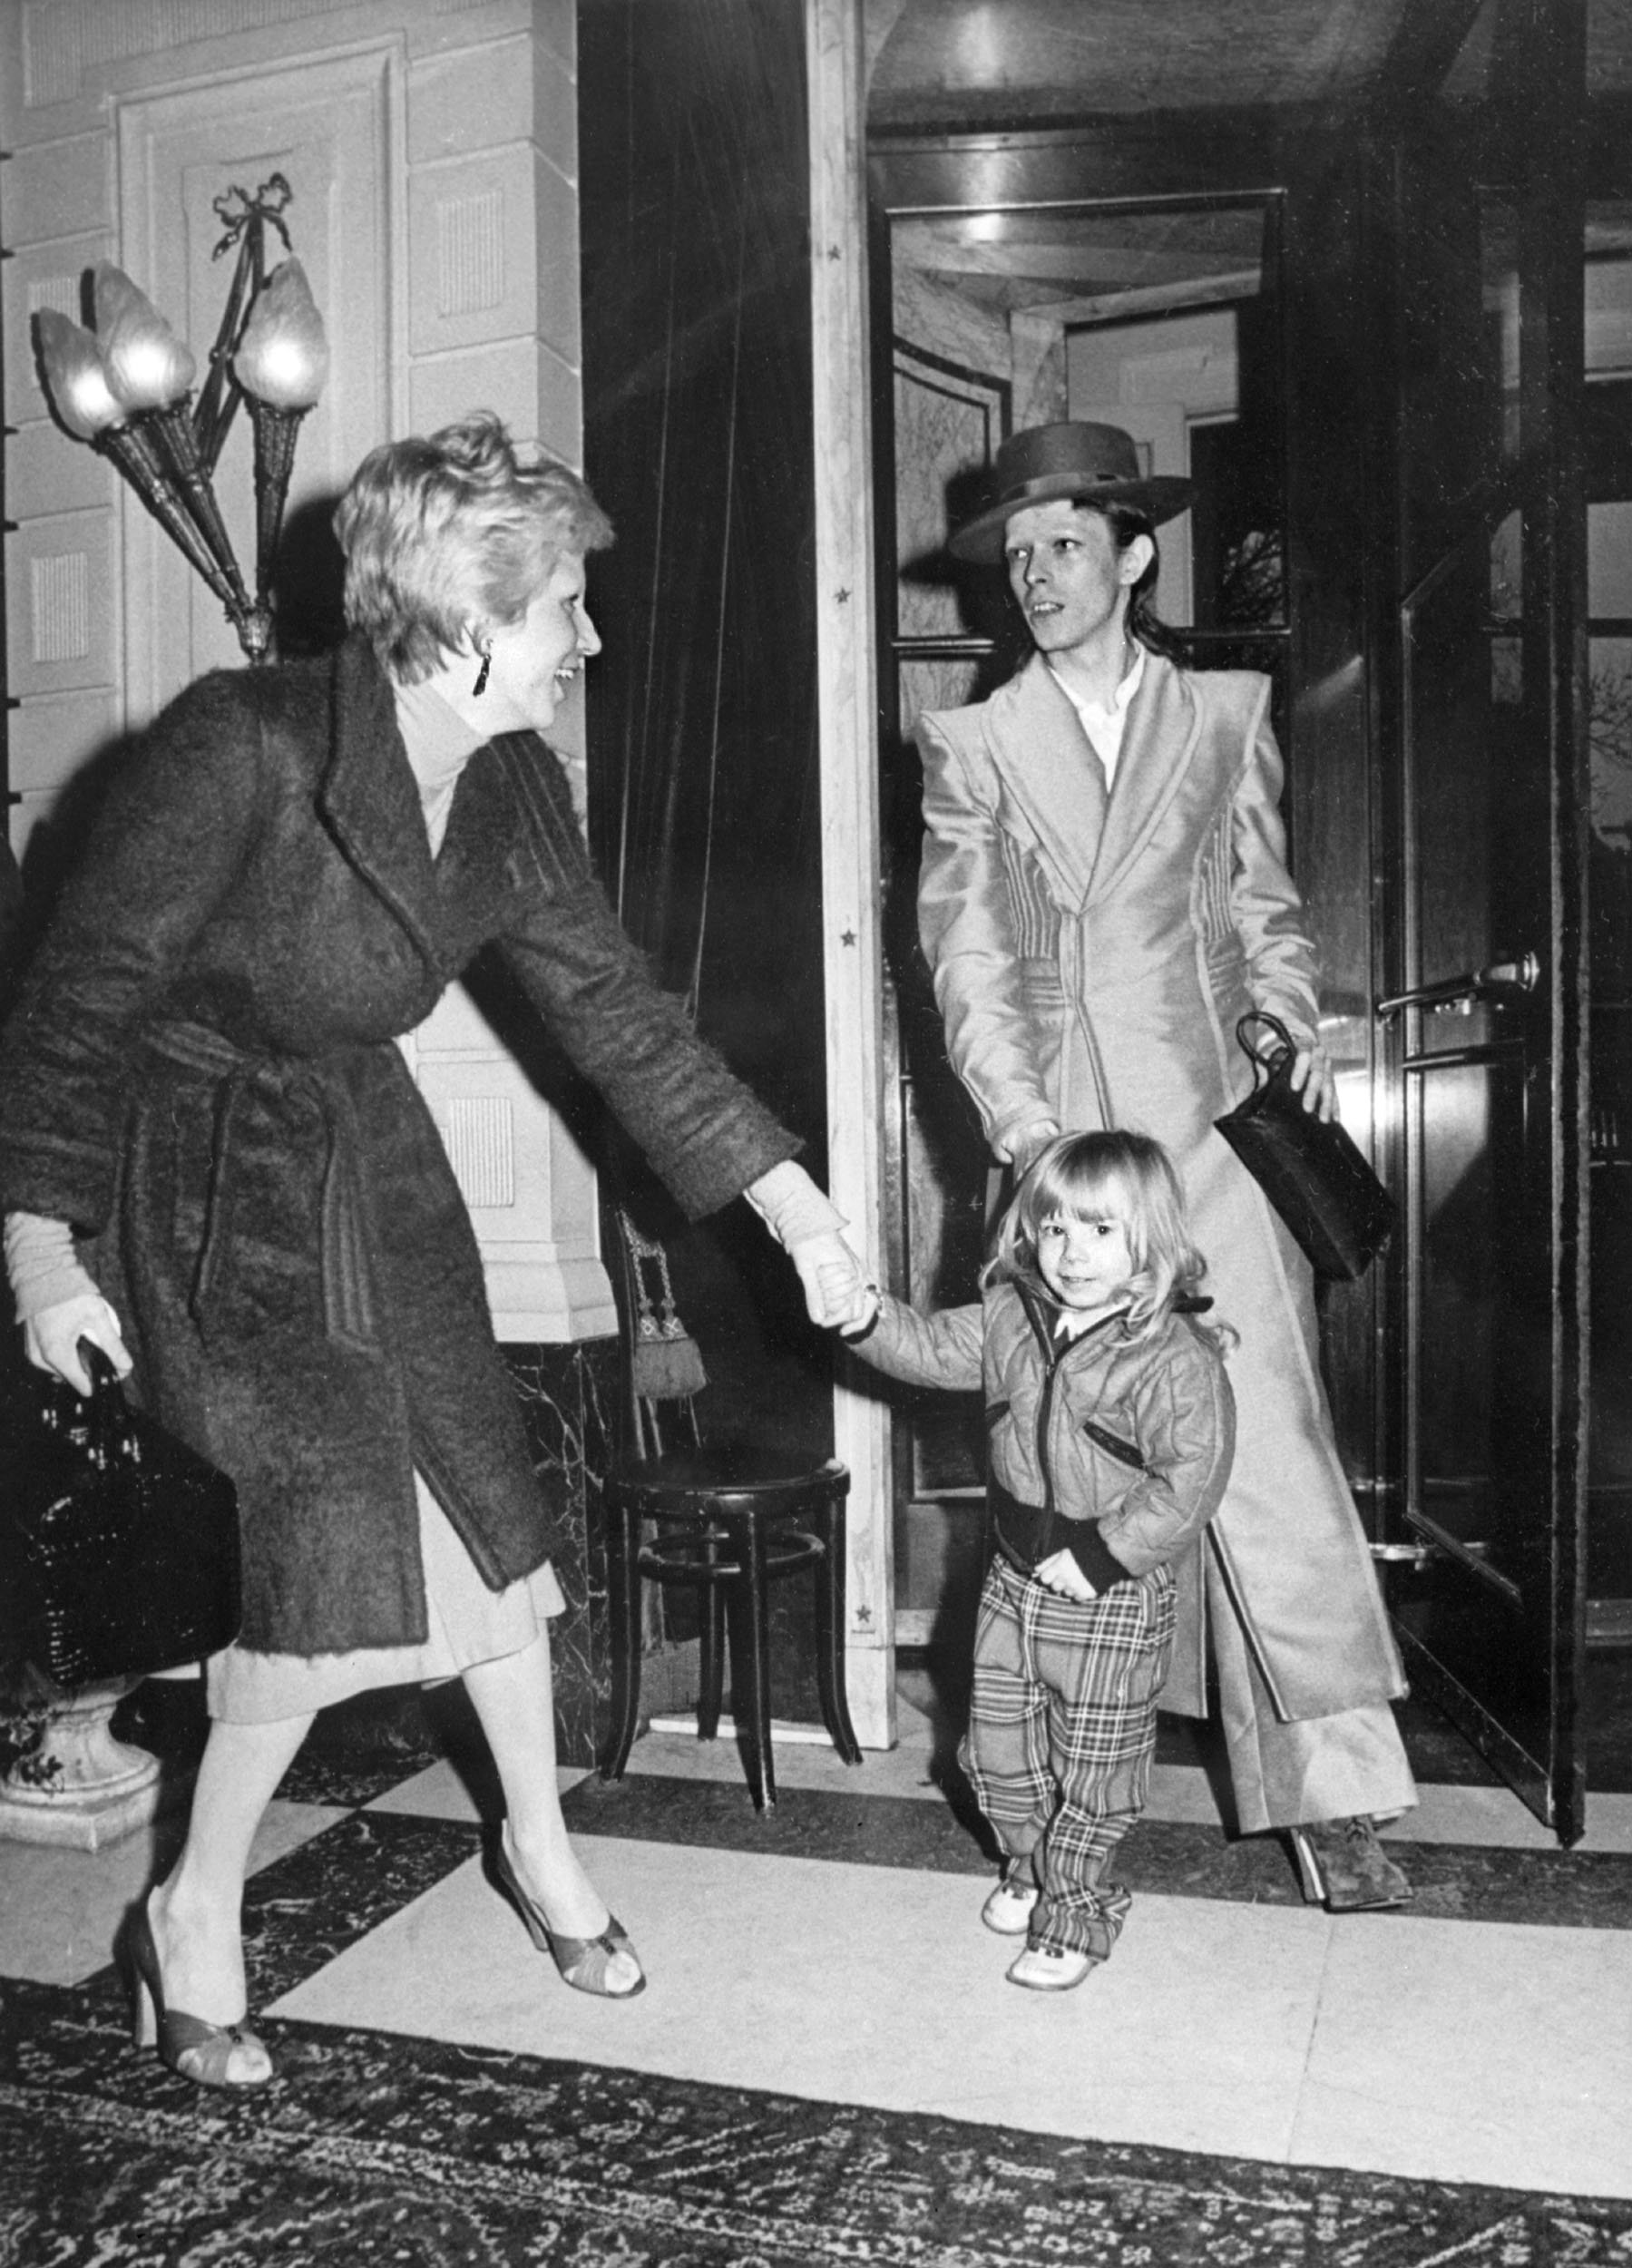 David Bowie with Angie Bowie and their son Zowie Bowie (Duncan Jones) in 1974 in Amsterdam, Netherlands | Photo: AFP via Getty Images